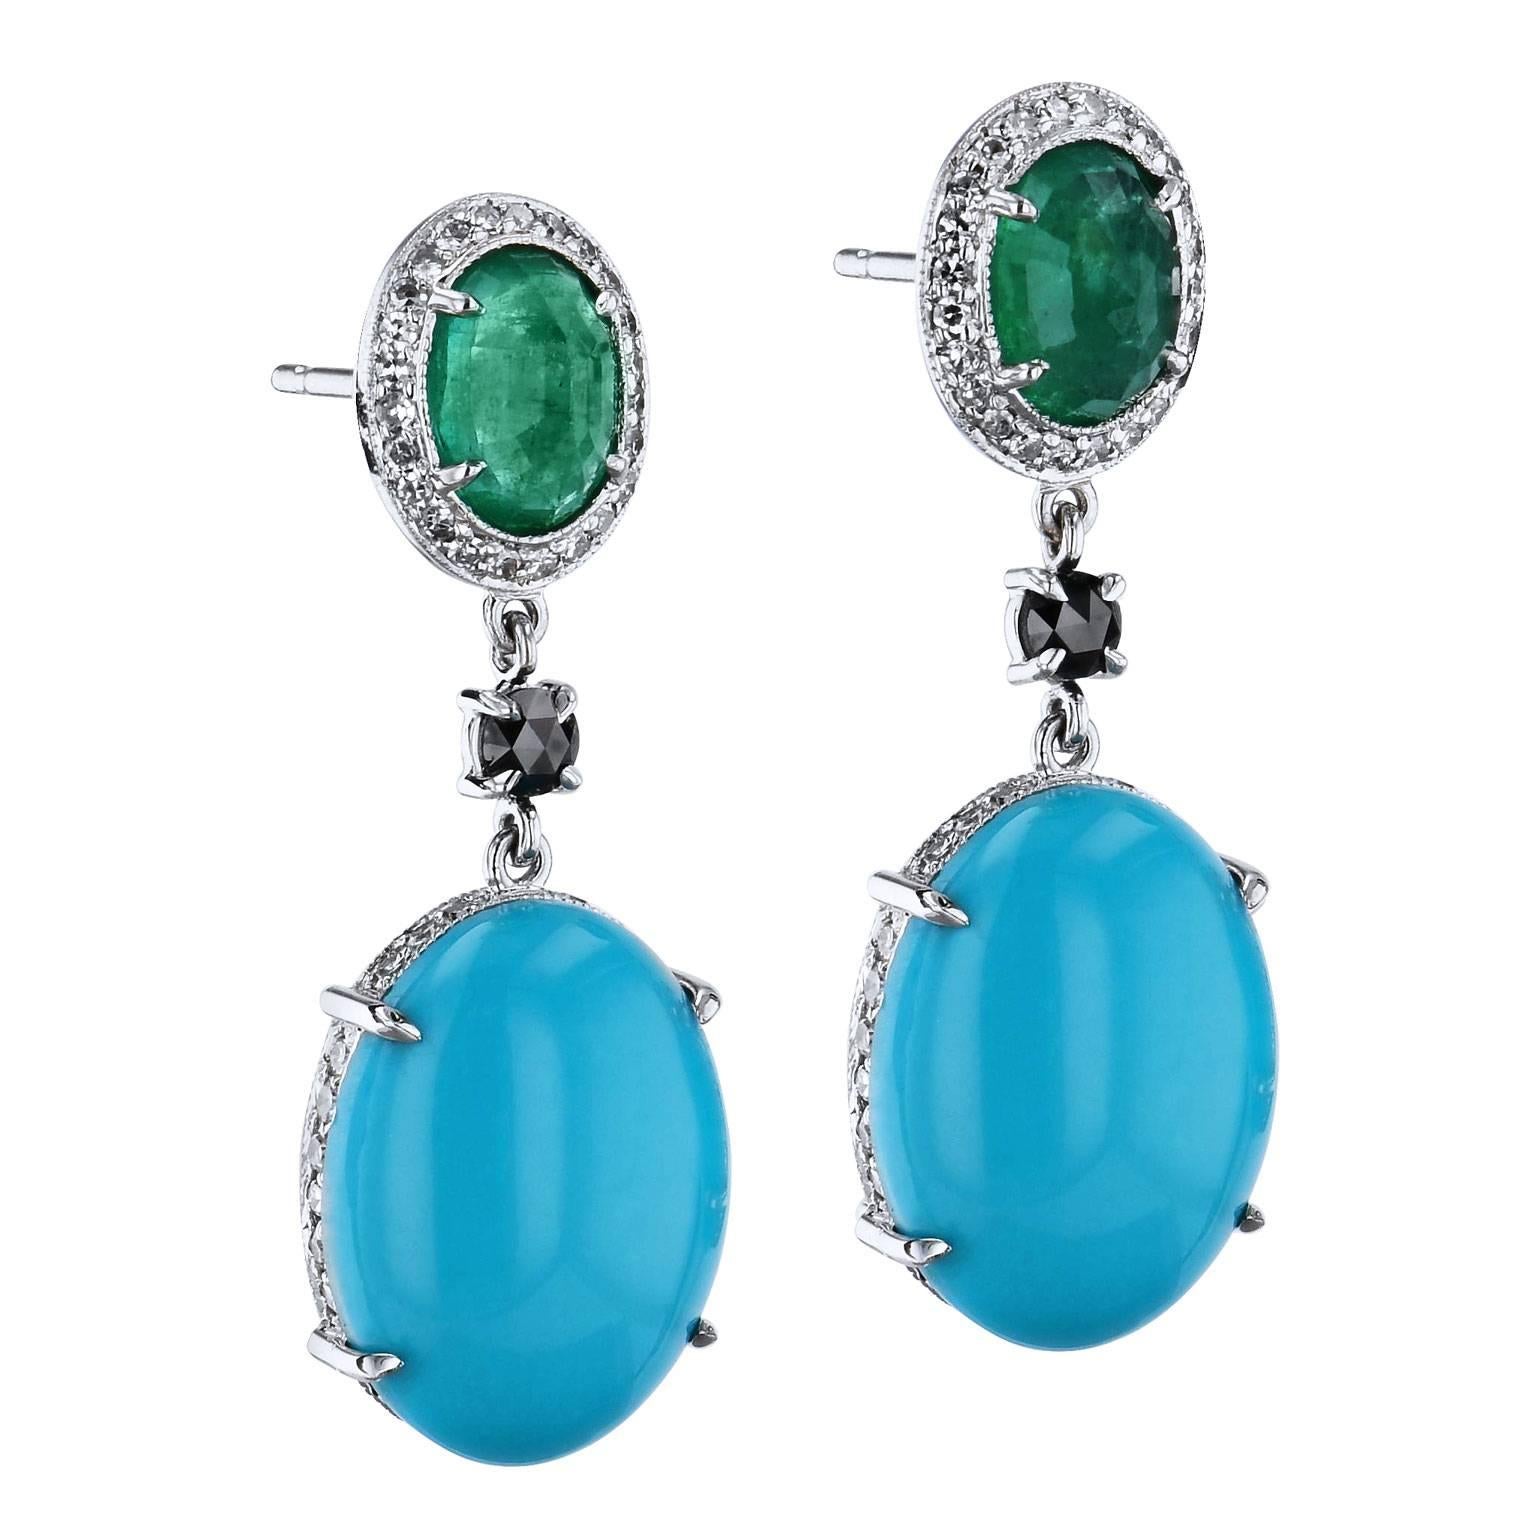 Luscious, handmade drop earrings designed by H and fashioned in 18 karat white gold, feature two emerald cabochons above with a total weight of 2.32 carat, while two turquoise cabochons with a total weight of 12.72 carat, hang with poise below (16